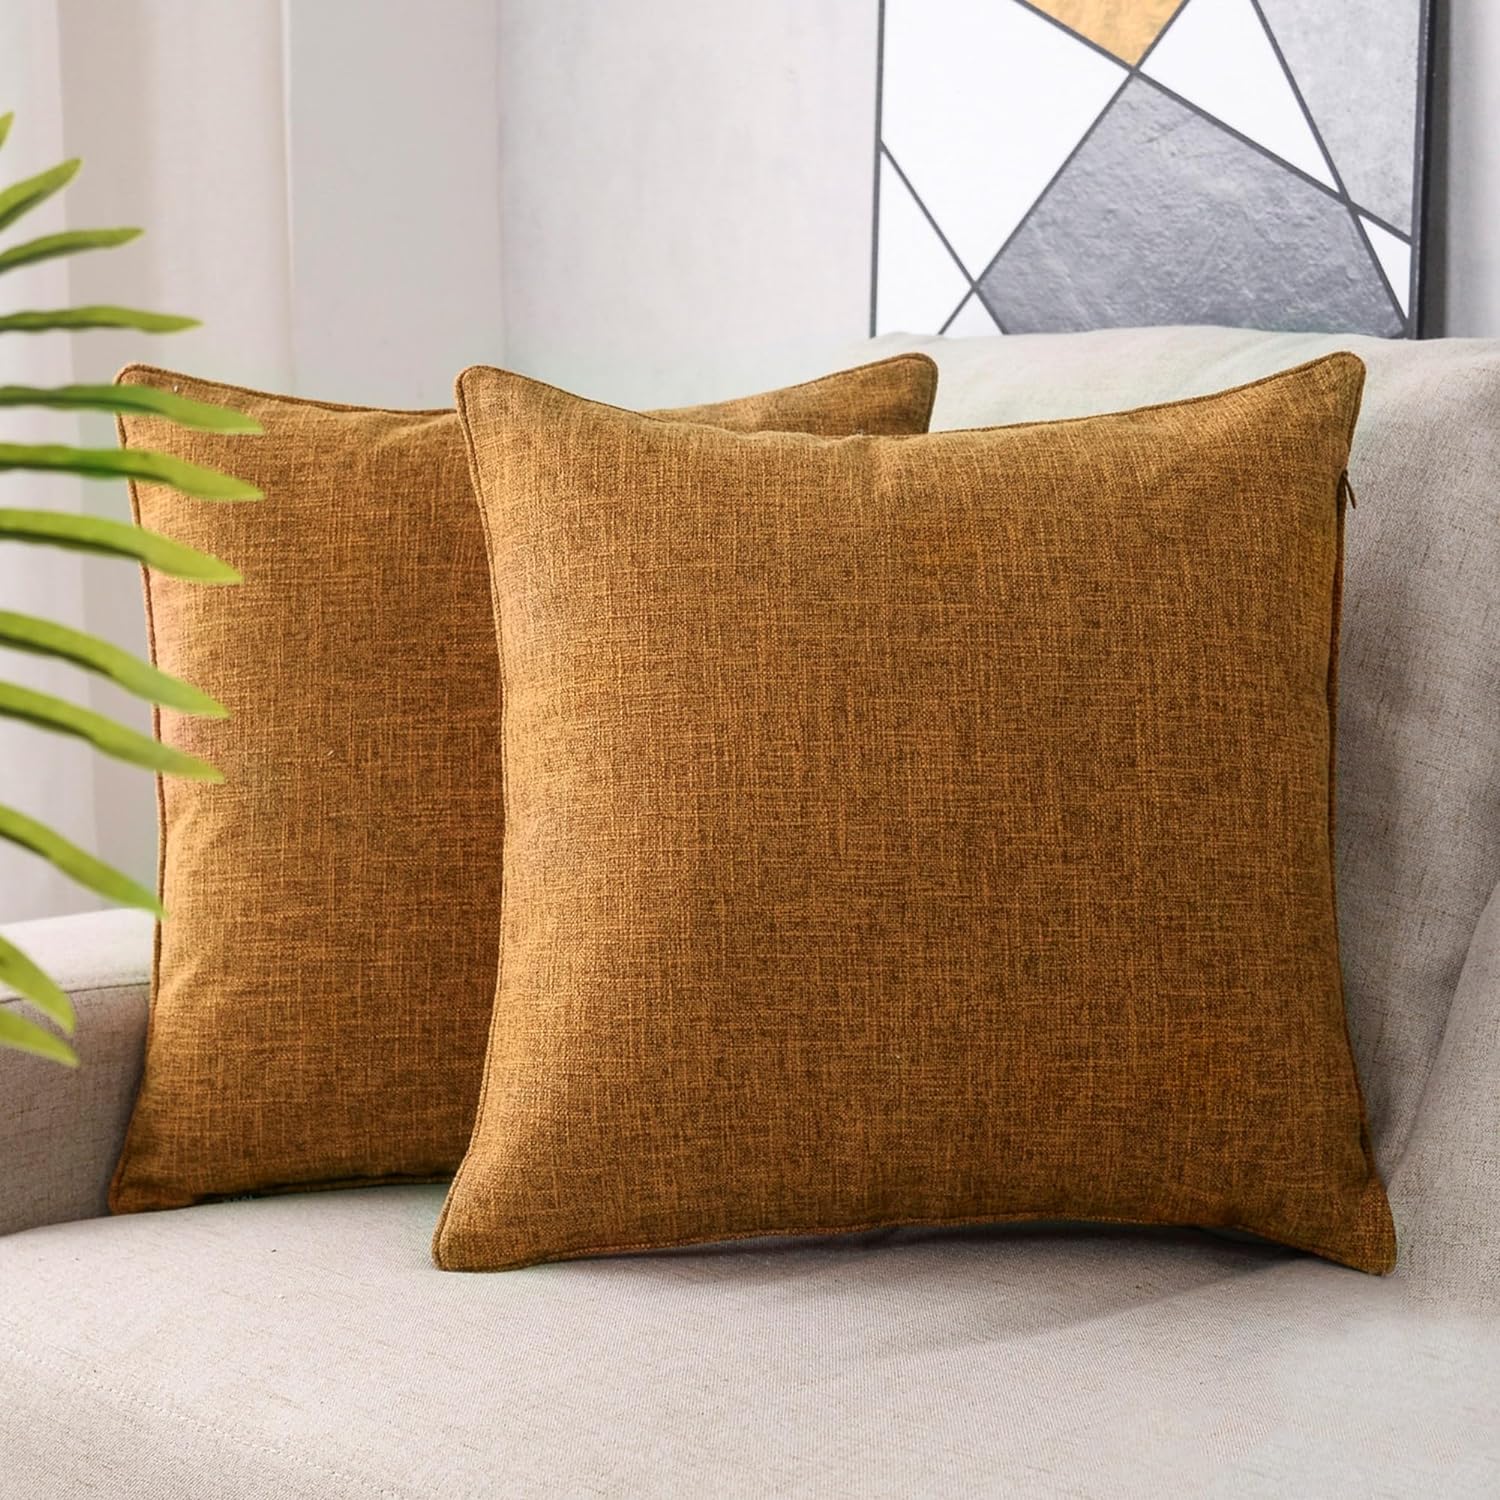 HPUK Linen Throw Pillow Covers Pack of 2, 18x18 Inch Accent Cushion Covers for Living Room, Bedroom, Decorative Solid Color Pillow Covers for Couch, Sofa, Chair, Golden Brown